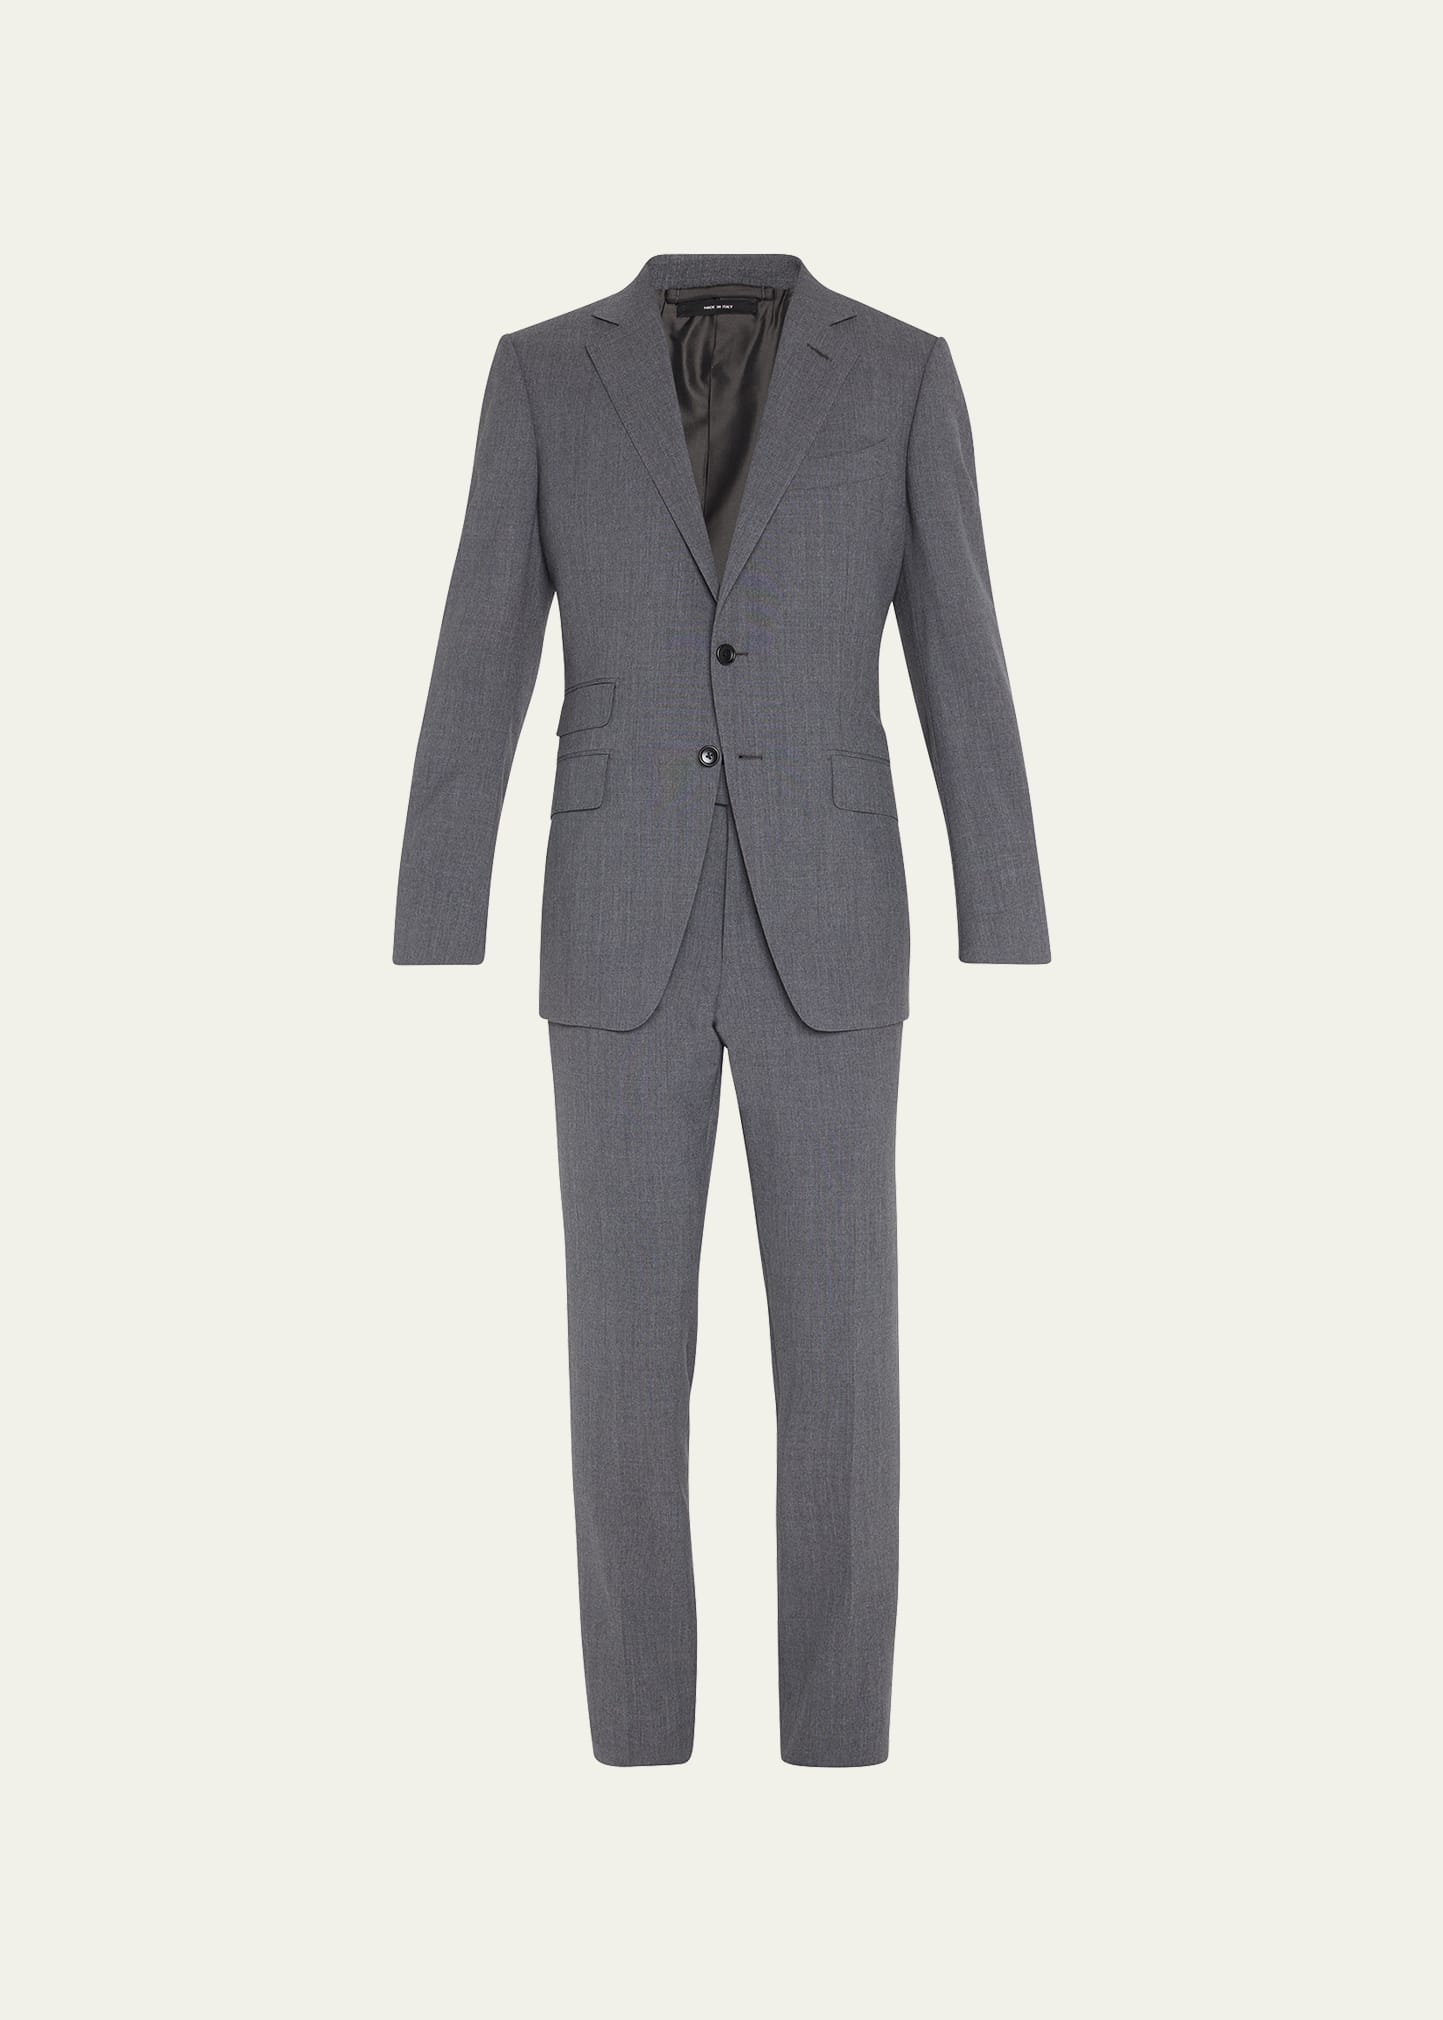 Tom Ford Men's O'connor Solid Wool Suit In Dark Grey Solid